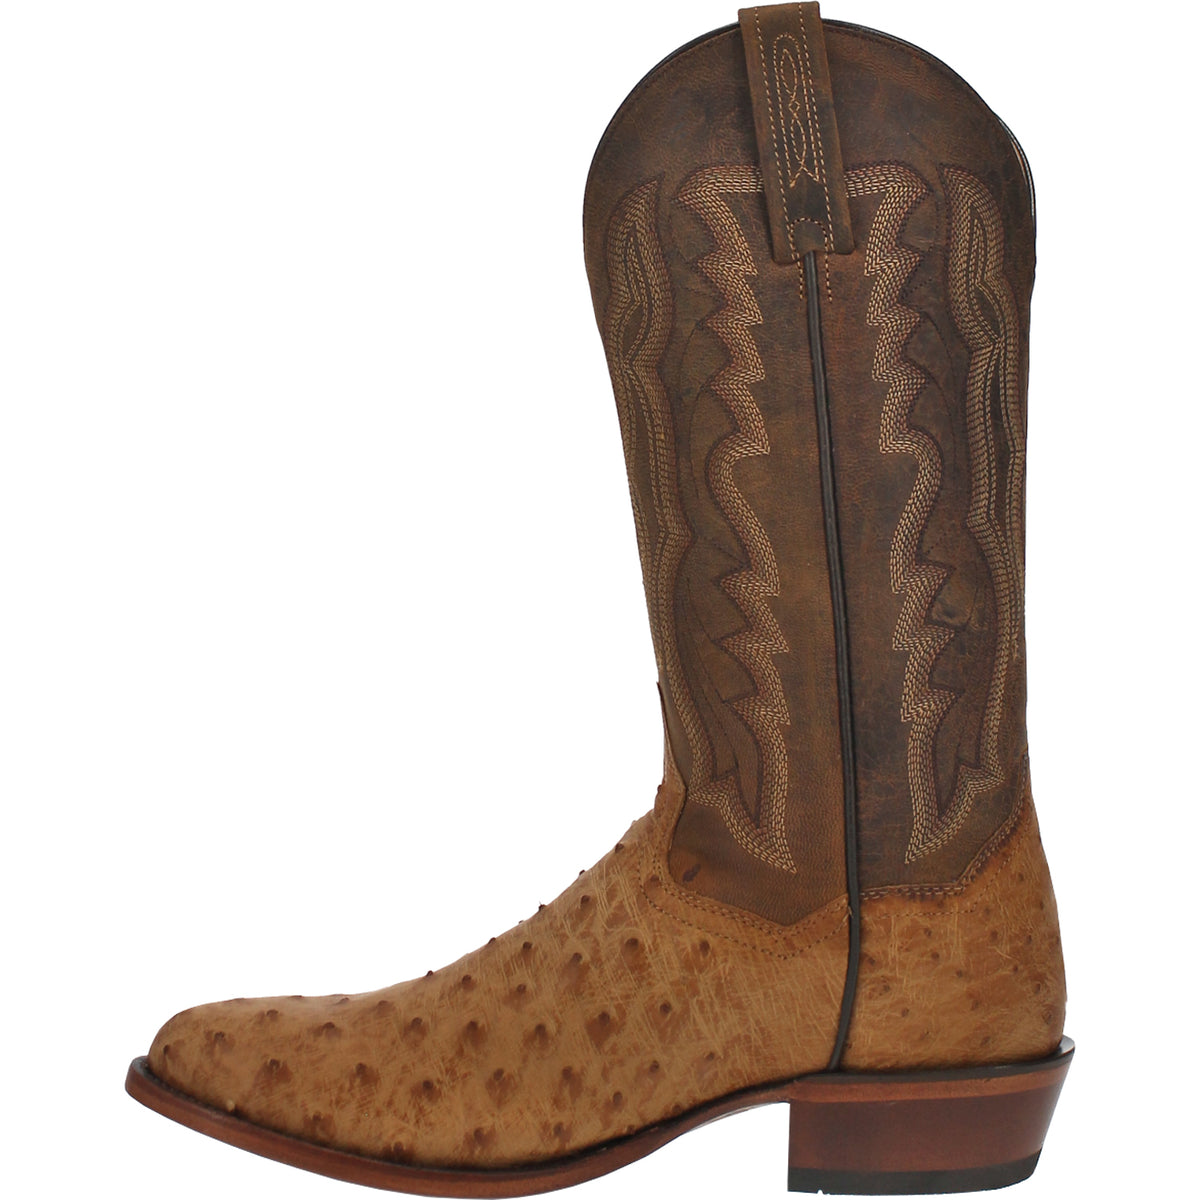 GEHRIG OSTRICH BOOT Cover